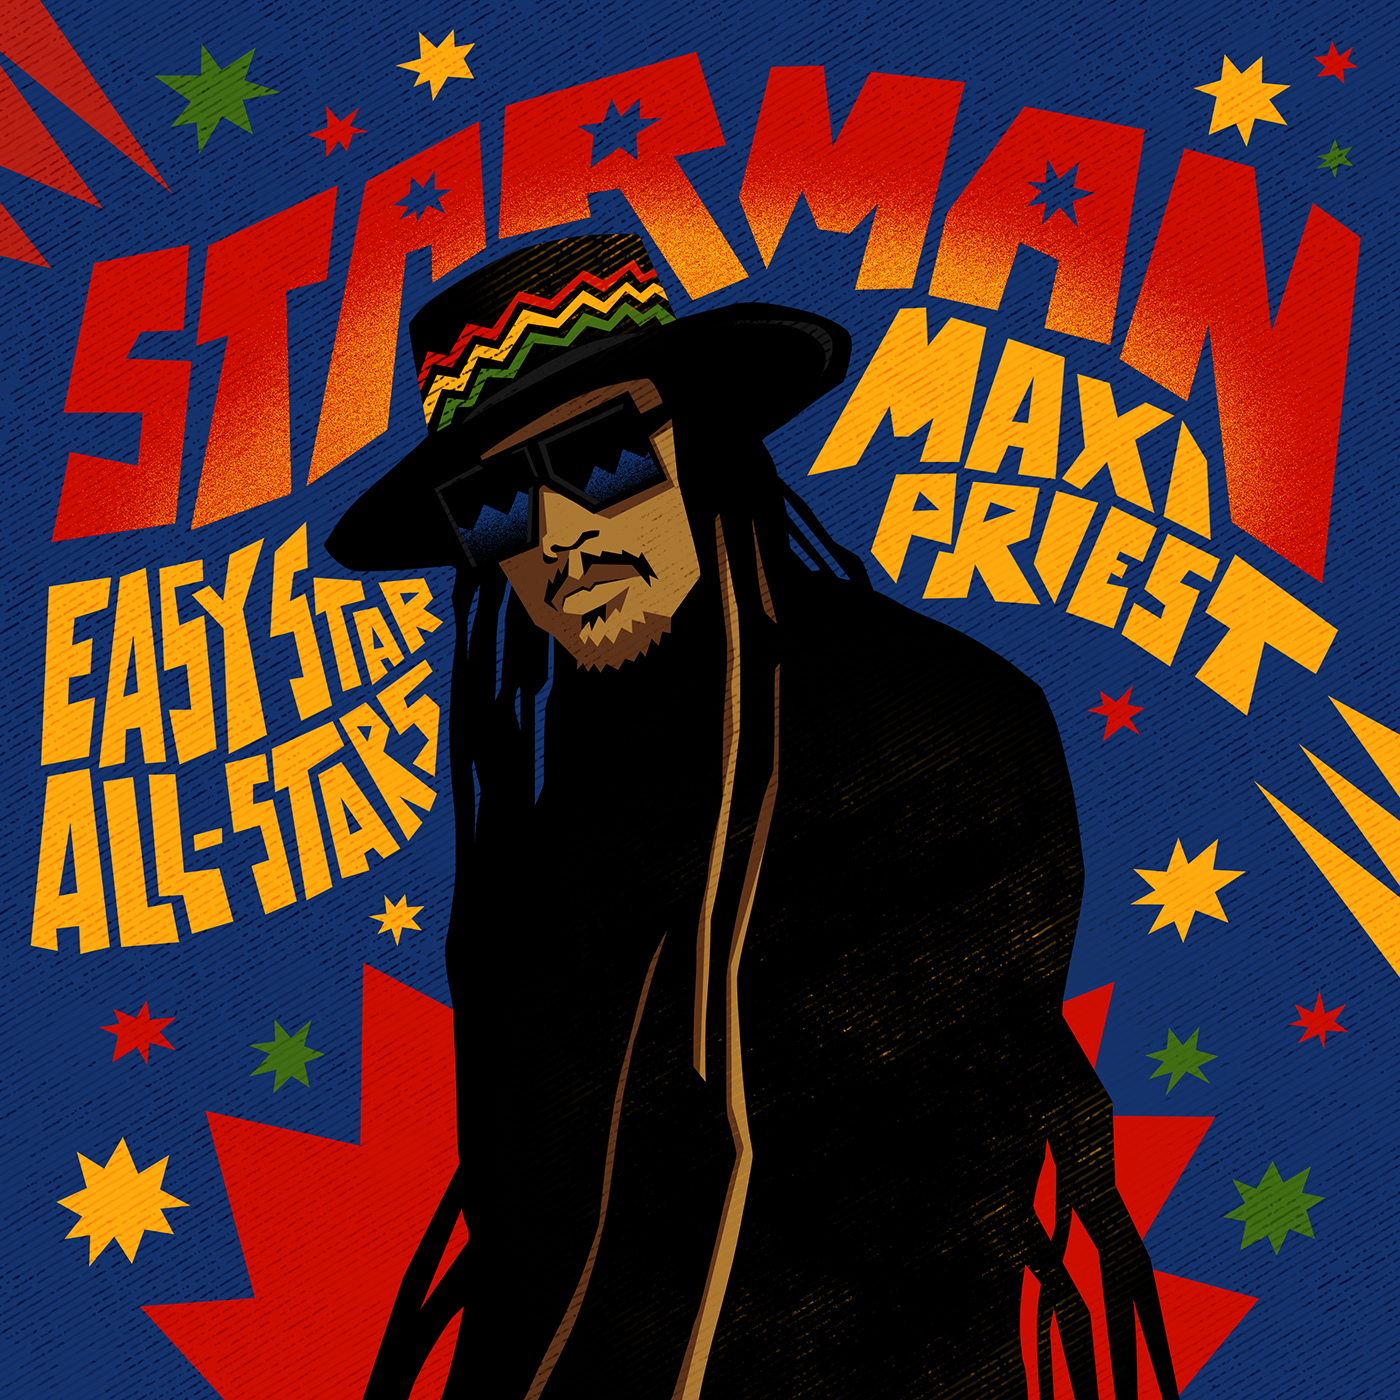 EASY STAR ALL-STARS ANNOUNCE TRIBUTE ALBUM AND DROP FIRST SINGLE "STARMAN"